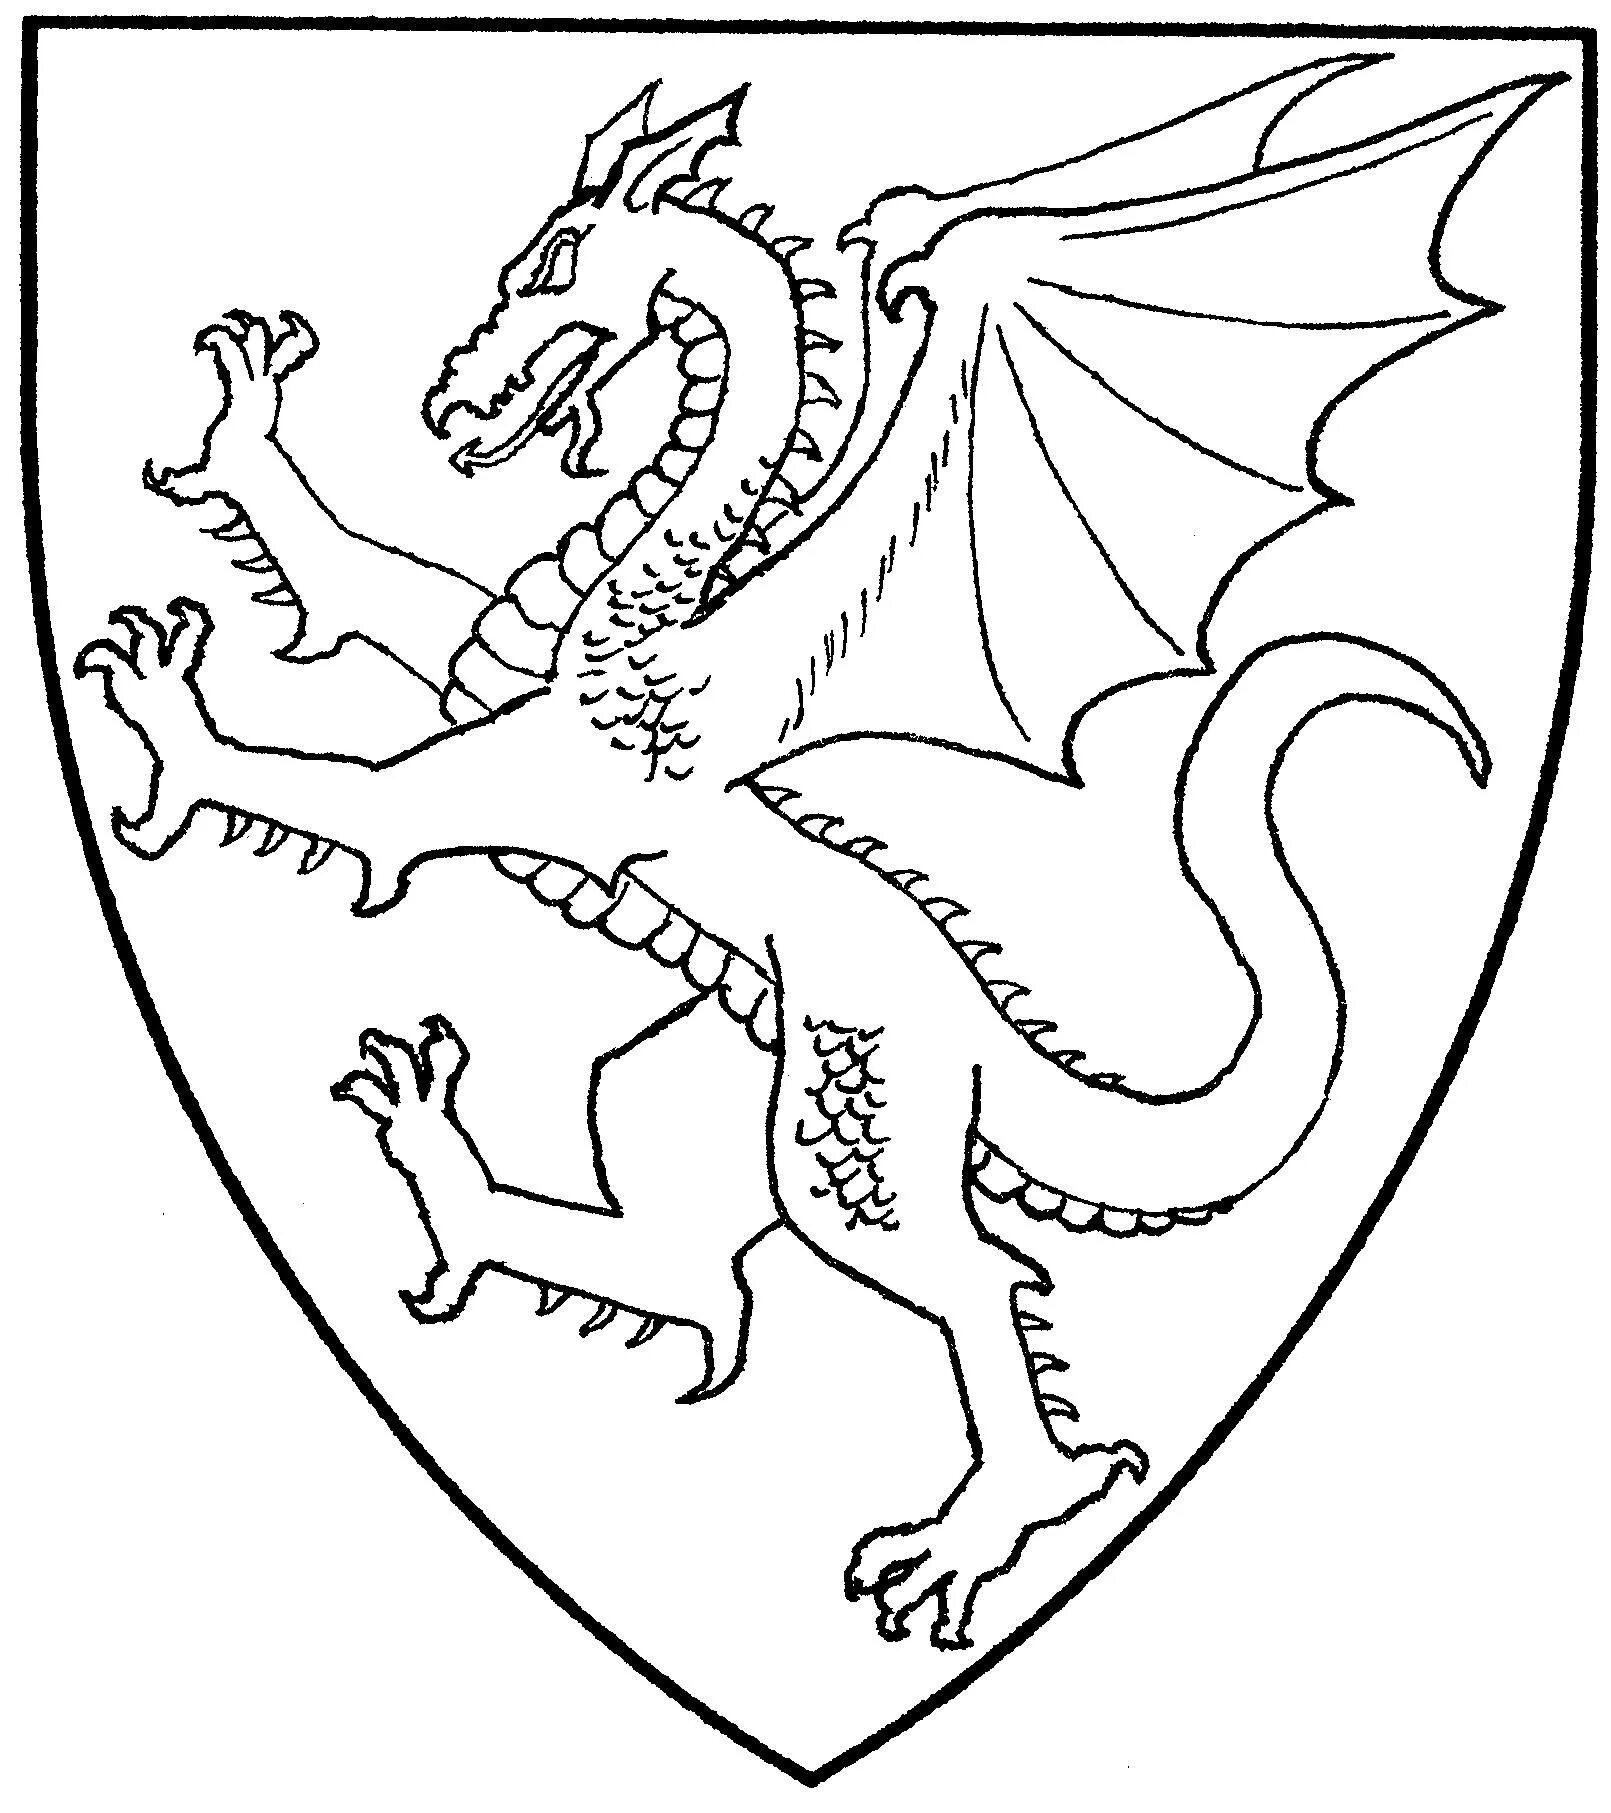 Knight's coat of arms #9